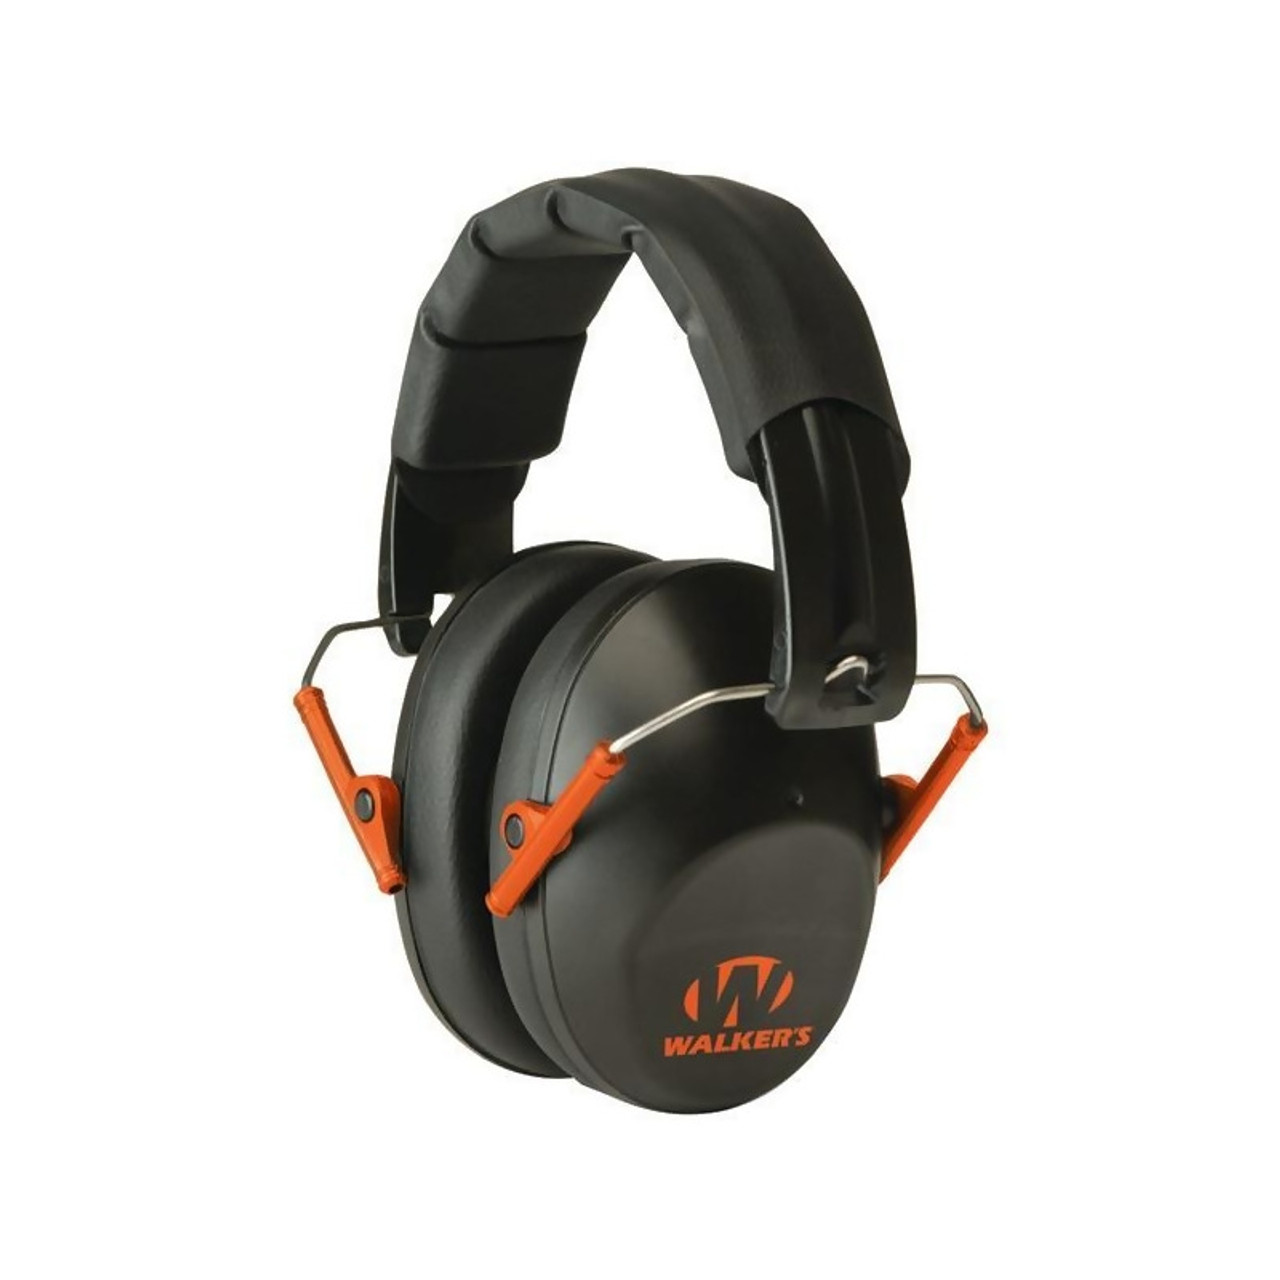 Walkers Game Ear GWP-FPM1-BKO PRO Low-Profile Folding Muff, Black & Orange
Walker’s Game Ear, the shooting and hunting industry pioneer in hearing protection, presents the PRO Low-Profile Folding Muffs. To ensure comfort, these muffs feature low-profile contoured cups, a padded headband and soft PVC ear pads all in a compact folding design. With a noise reducing rating (NRR) of 31dB, they help protect your hearing from sustained or loud sounds. These muffs sport the black finish with orange accent.  FeaturesLow-profile contoured cupsPadded headband for comfortable fitSoft PVC earpadsUltra lightweightCompact, folding designNoise reducing rating 31dBANSI S3.19-ratedBlack/Orange